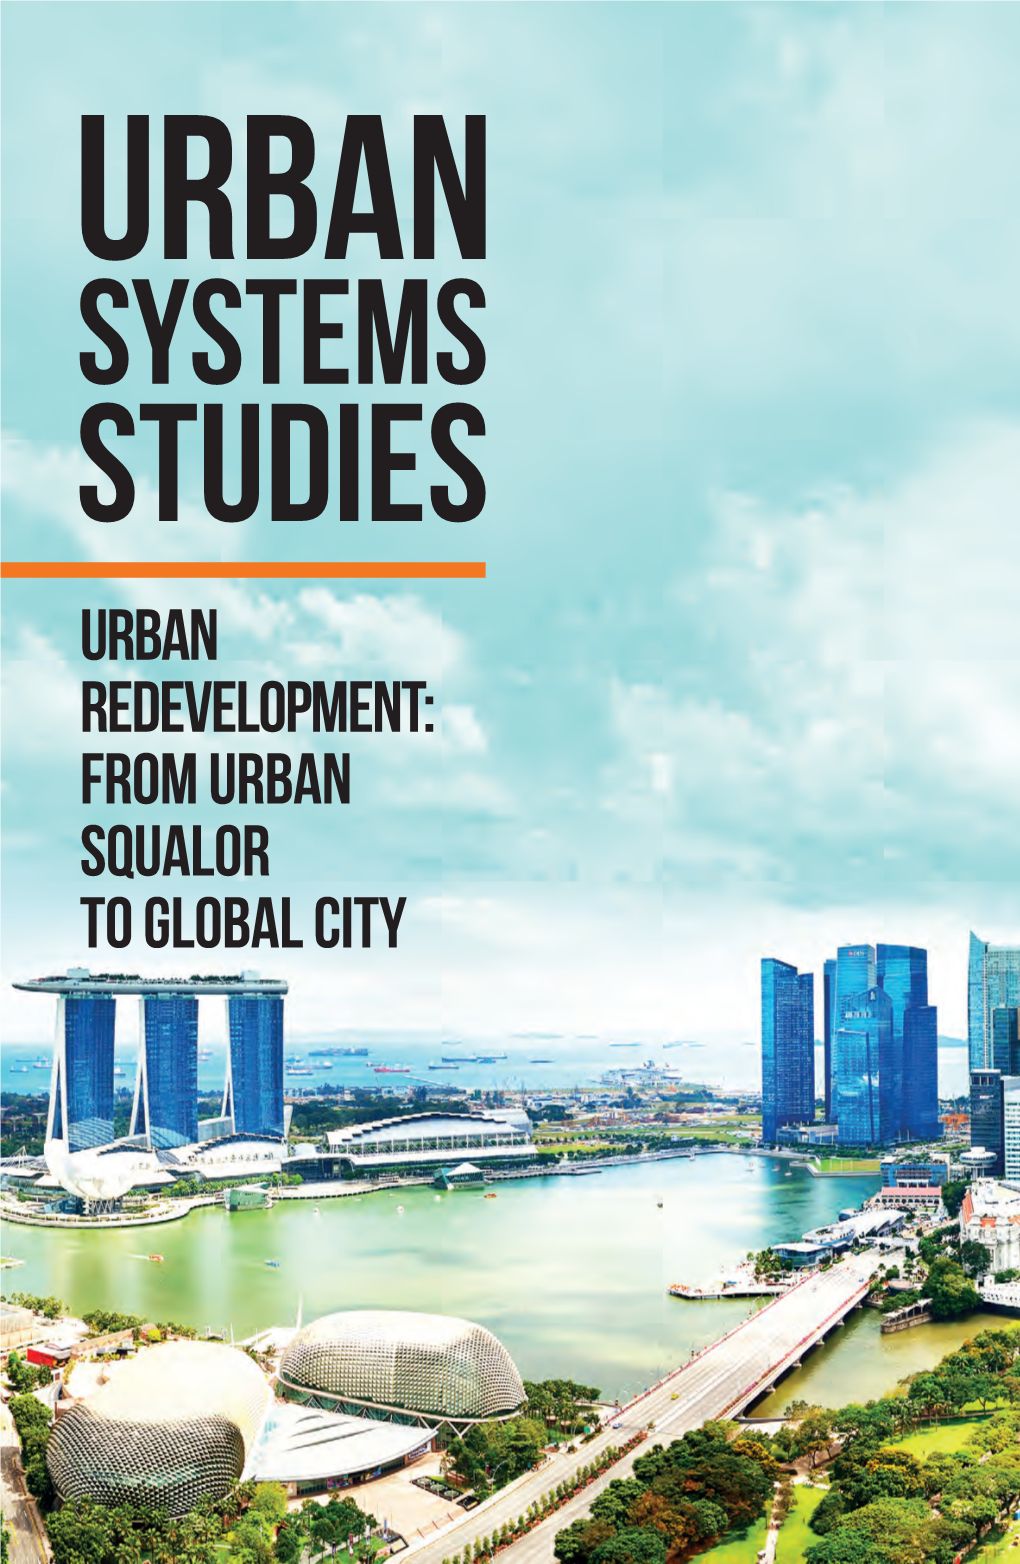 Urban Redevelopment: from Urban Squalor to Global City